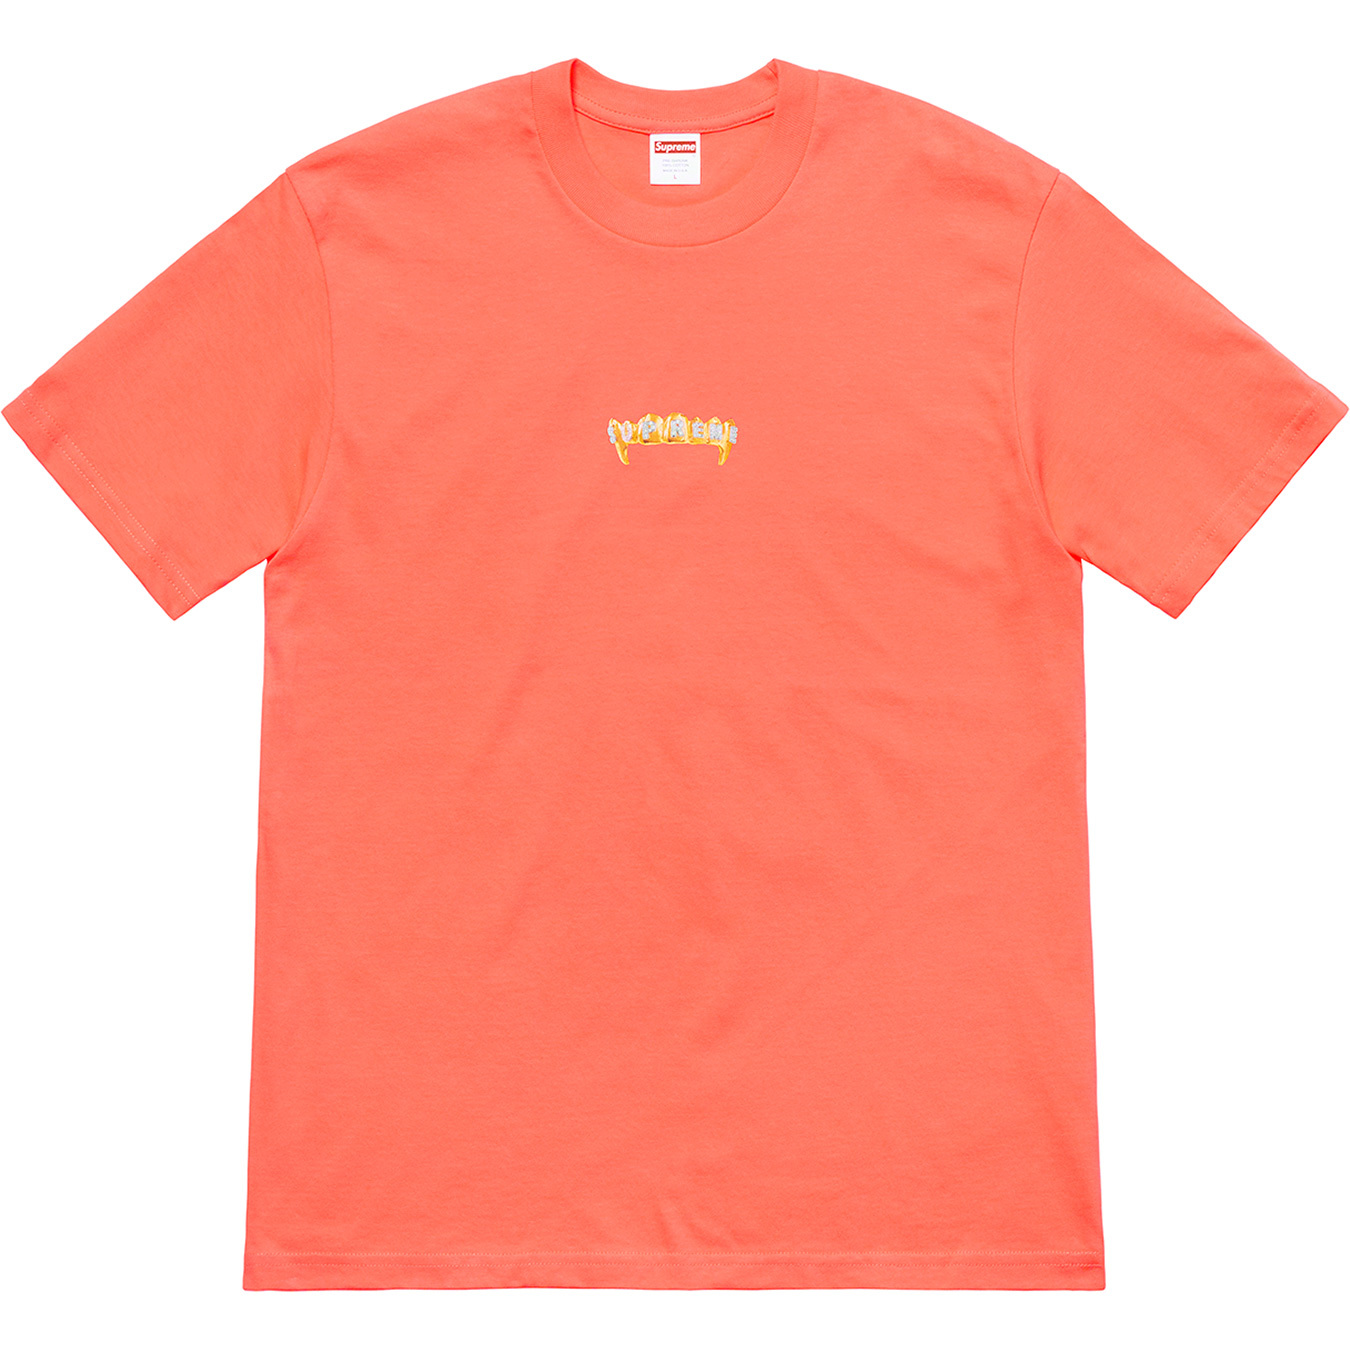 Fronts Tee - spring summer 2019 - Supreme